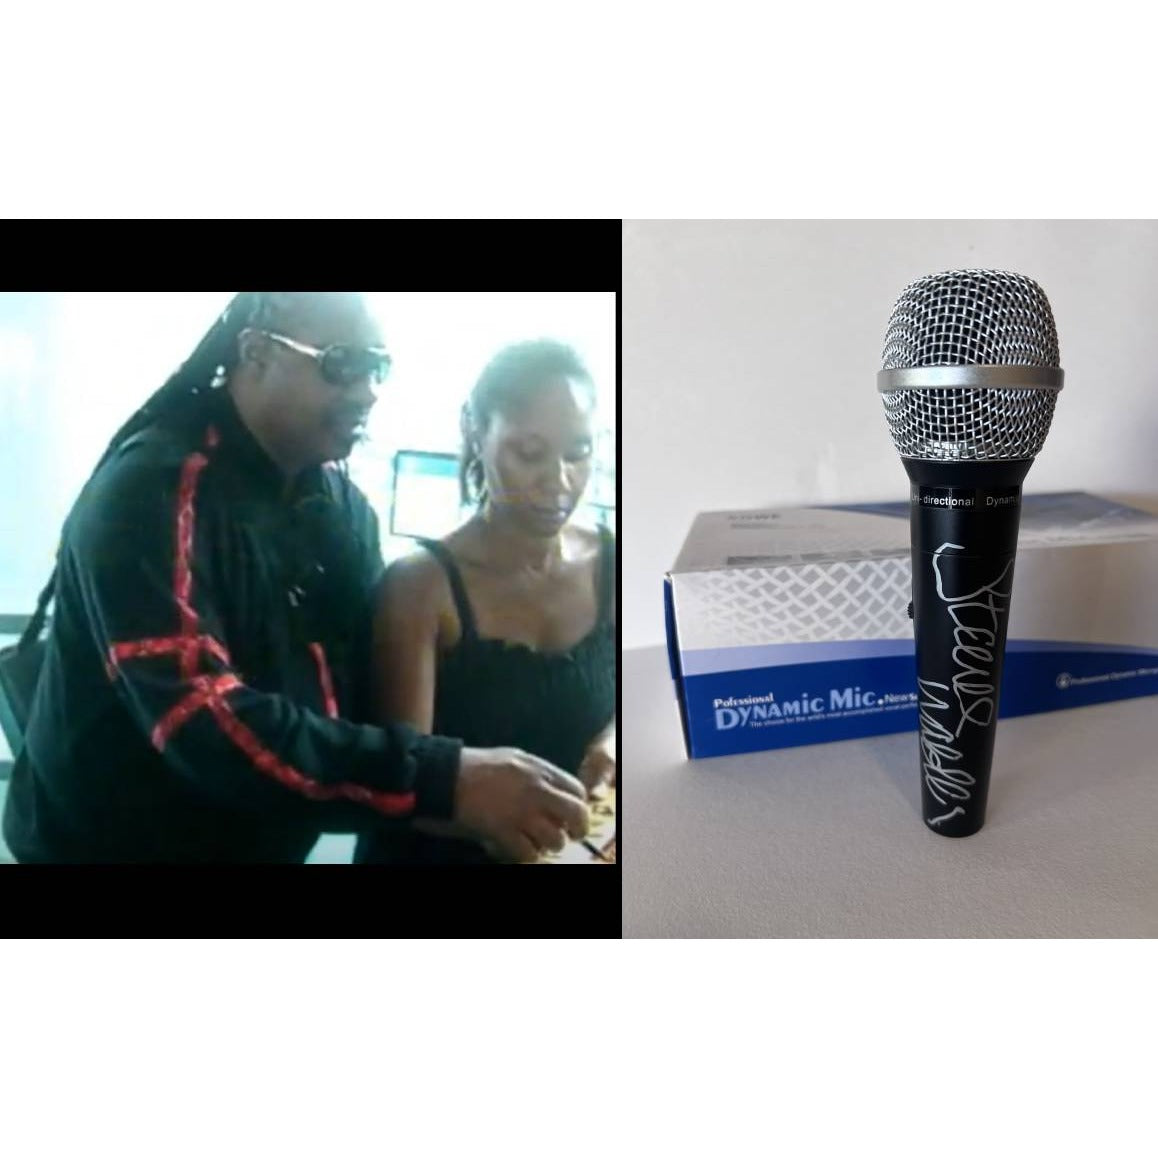 Stevie Wonder microphone signed with proof